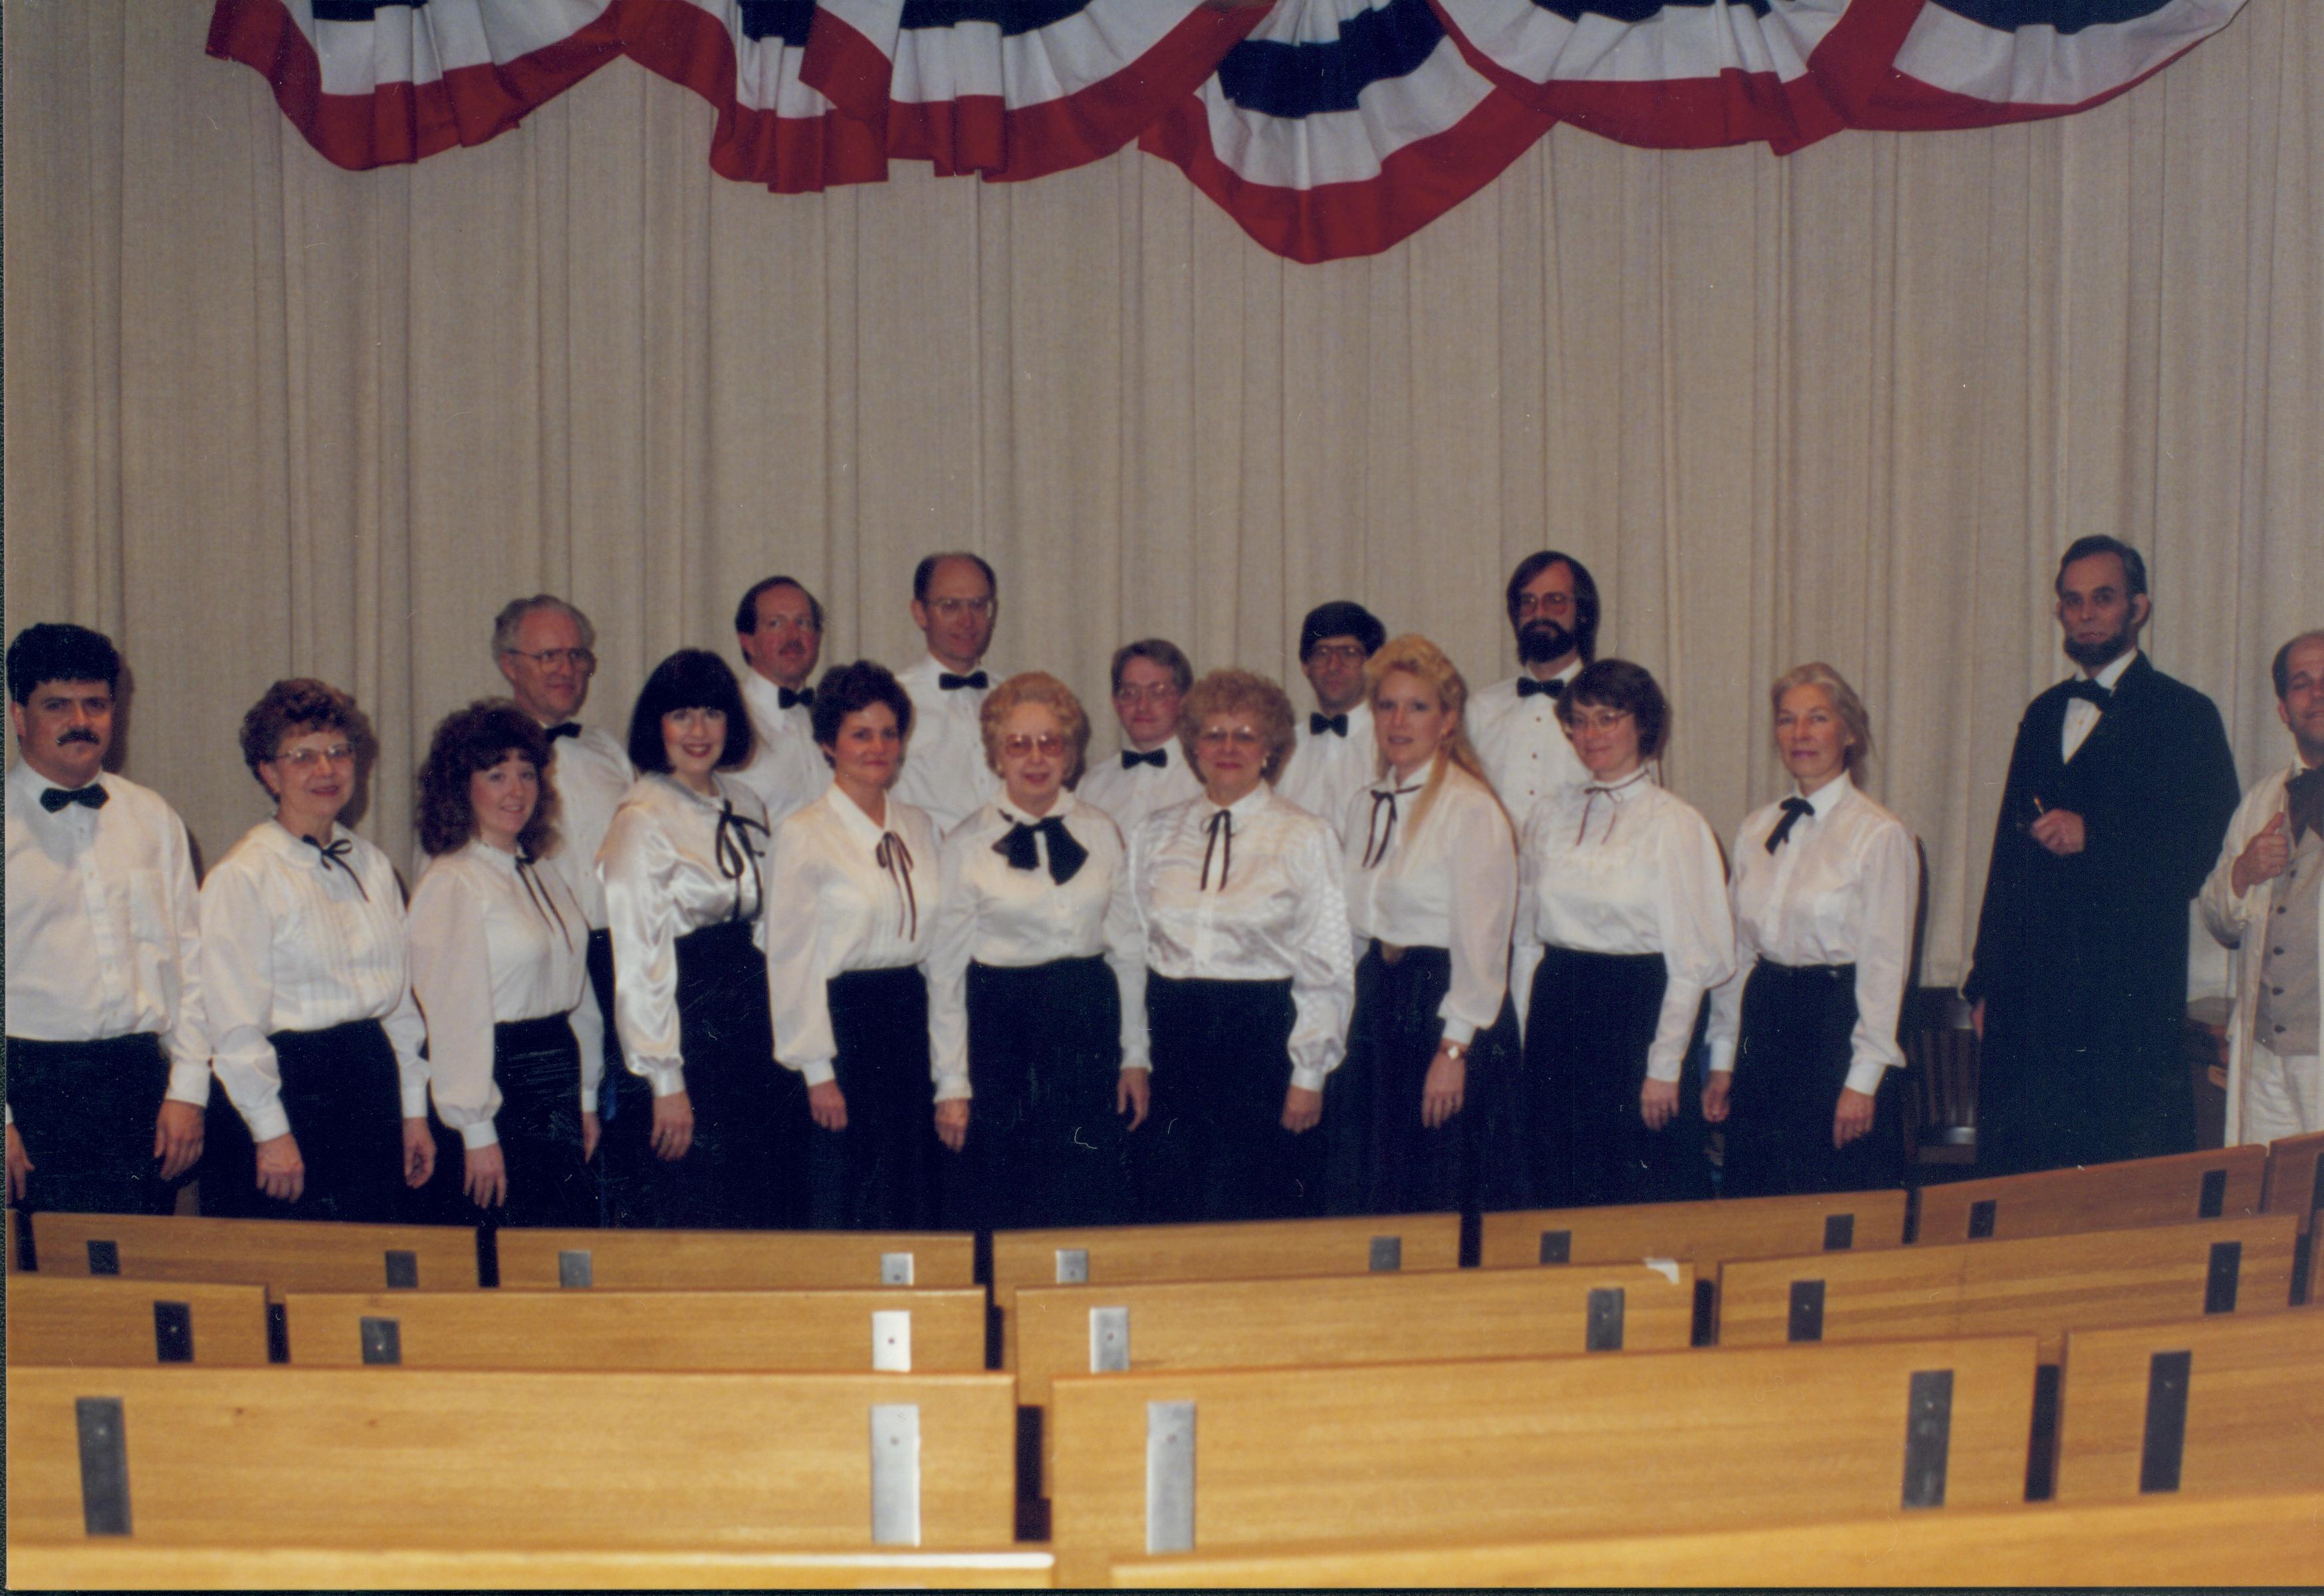 Choir standing in front of curtain with impersonators. Lincoln Home NHS- Lincoln's Birthday 1988 birthday, Lincoln, Douglas